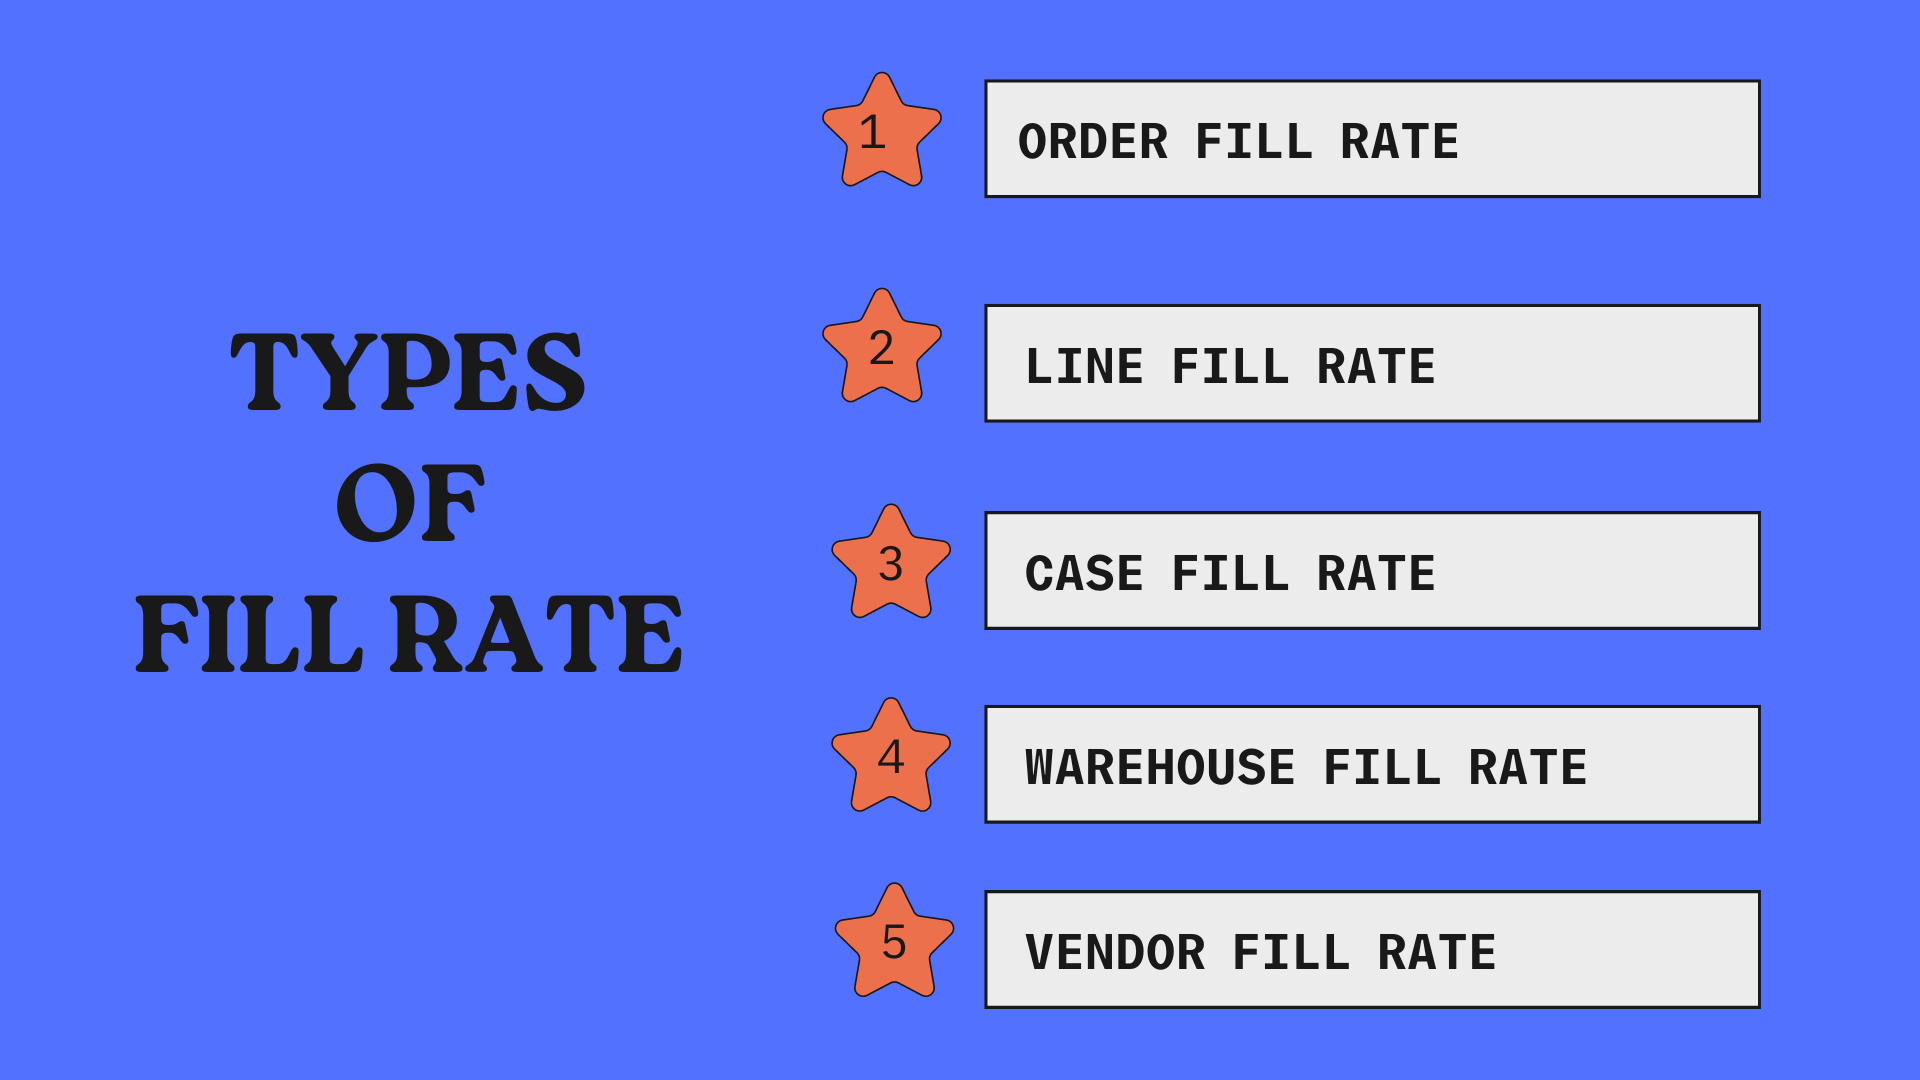 Types of fill rate 